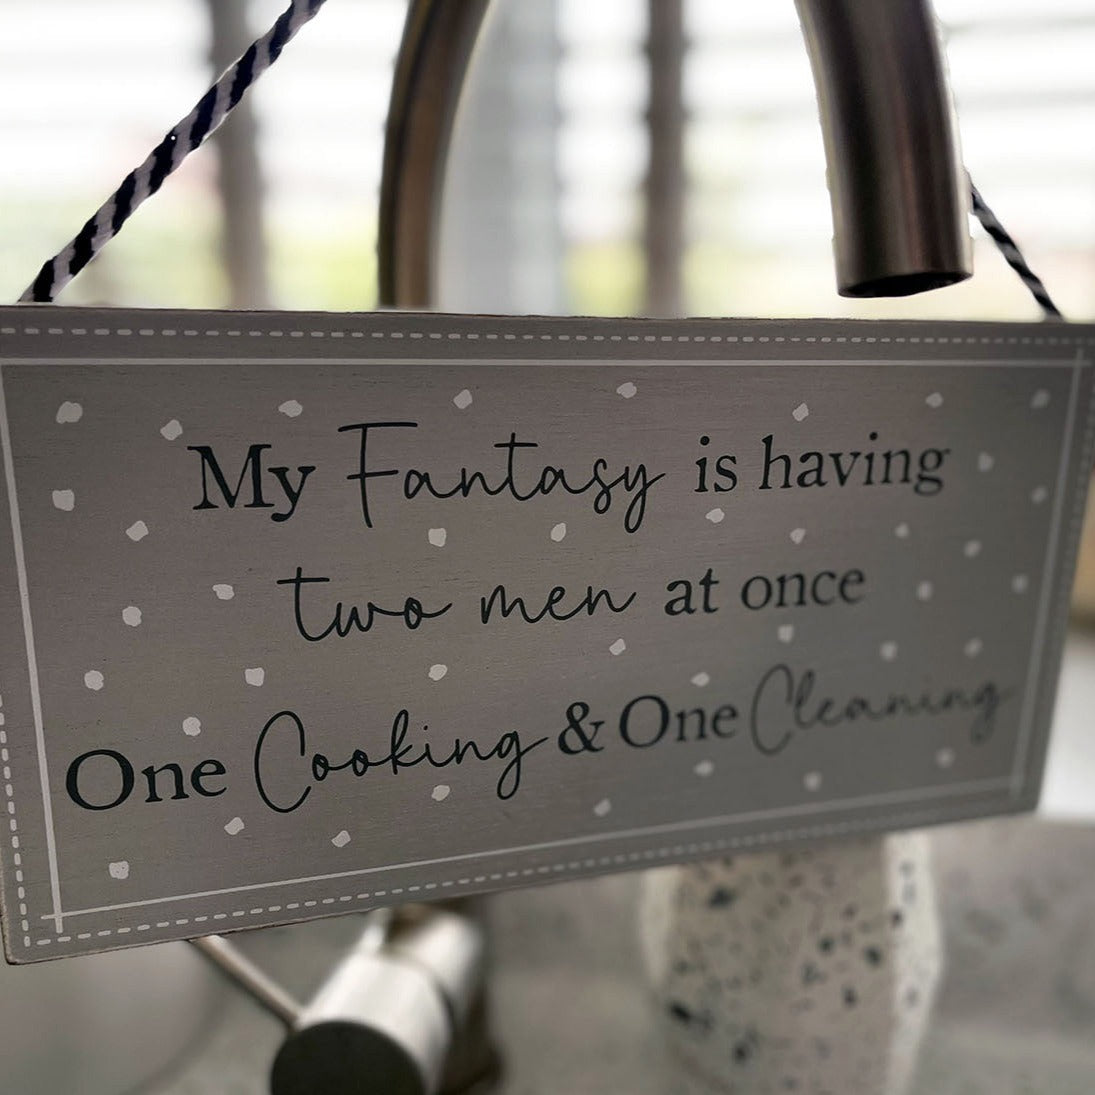 Fantasy Cleaning & Cooking plaque